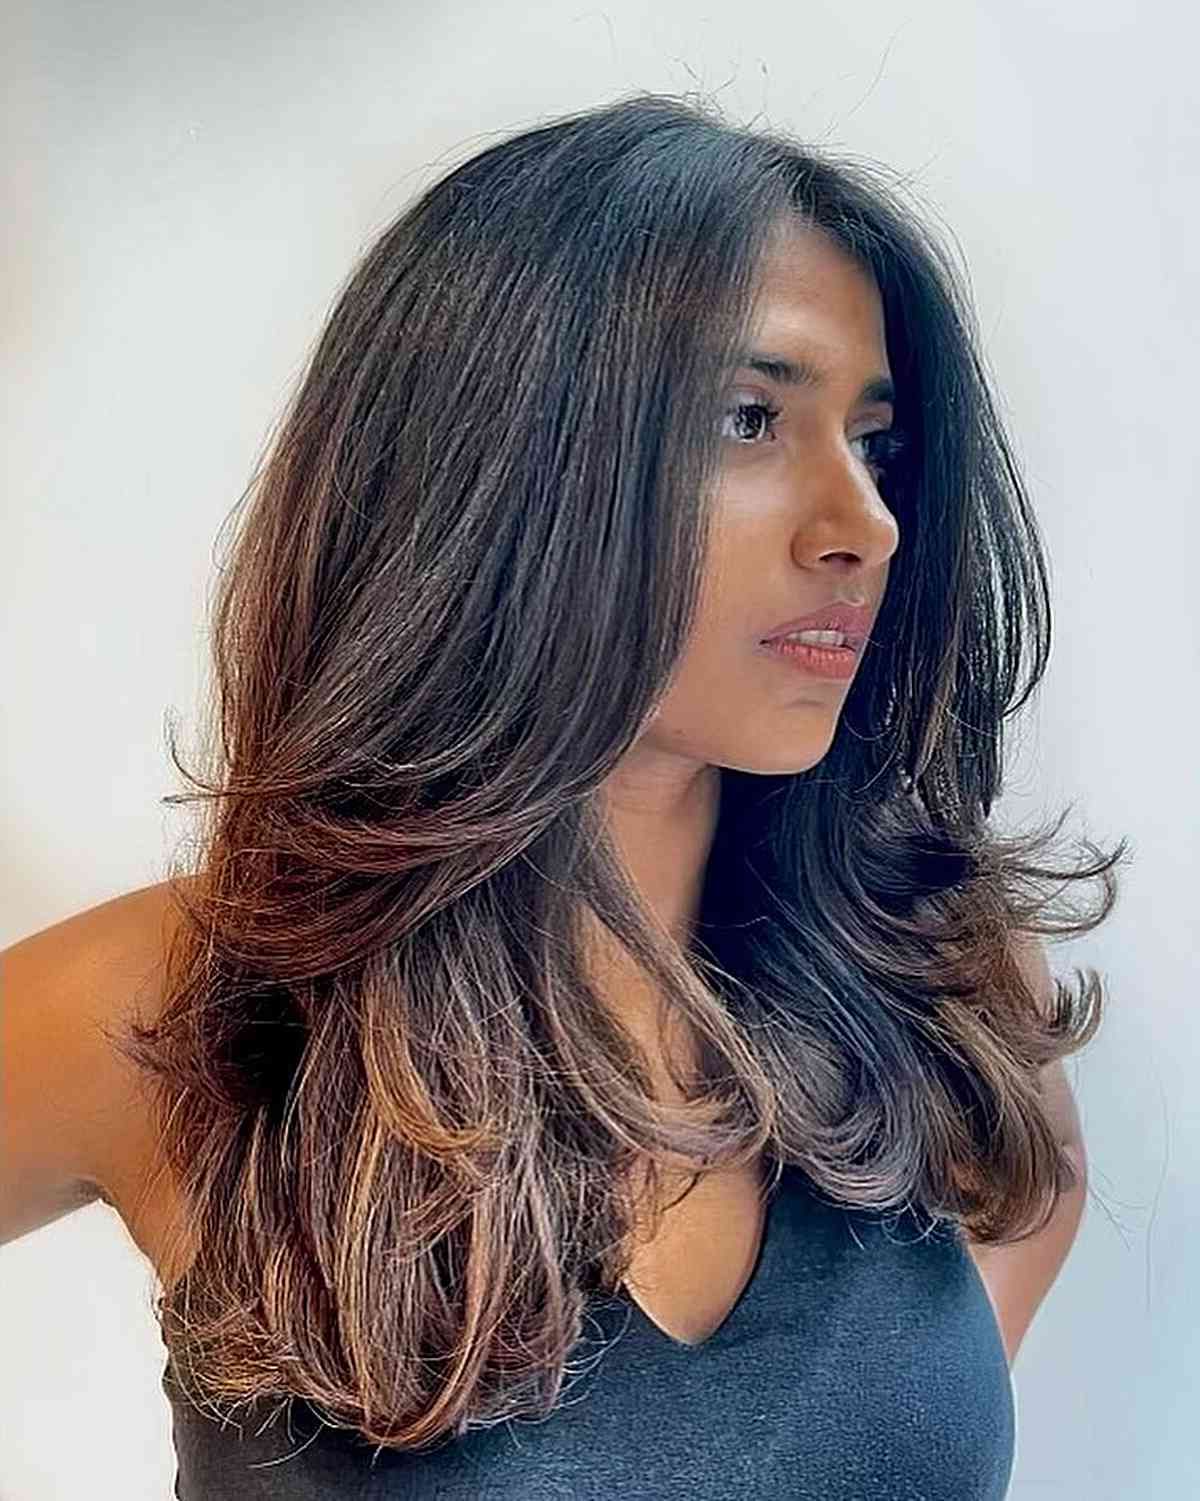 Preferred Textured Cut For Thick Hair With Regard To 90 Best Medium Length Hairstyles For Thick Hair To Feel Lighter (Gallery 12 of 20)